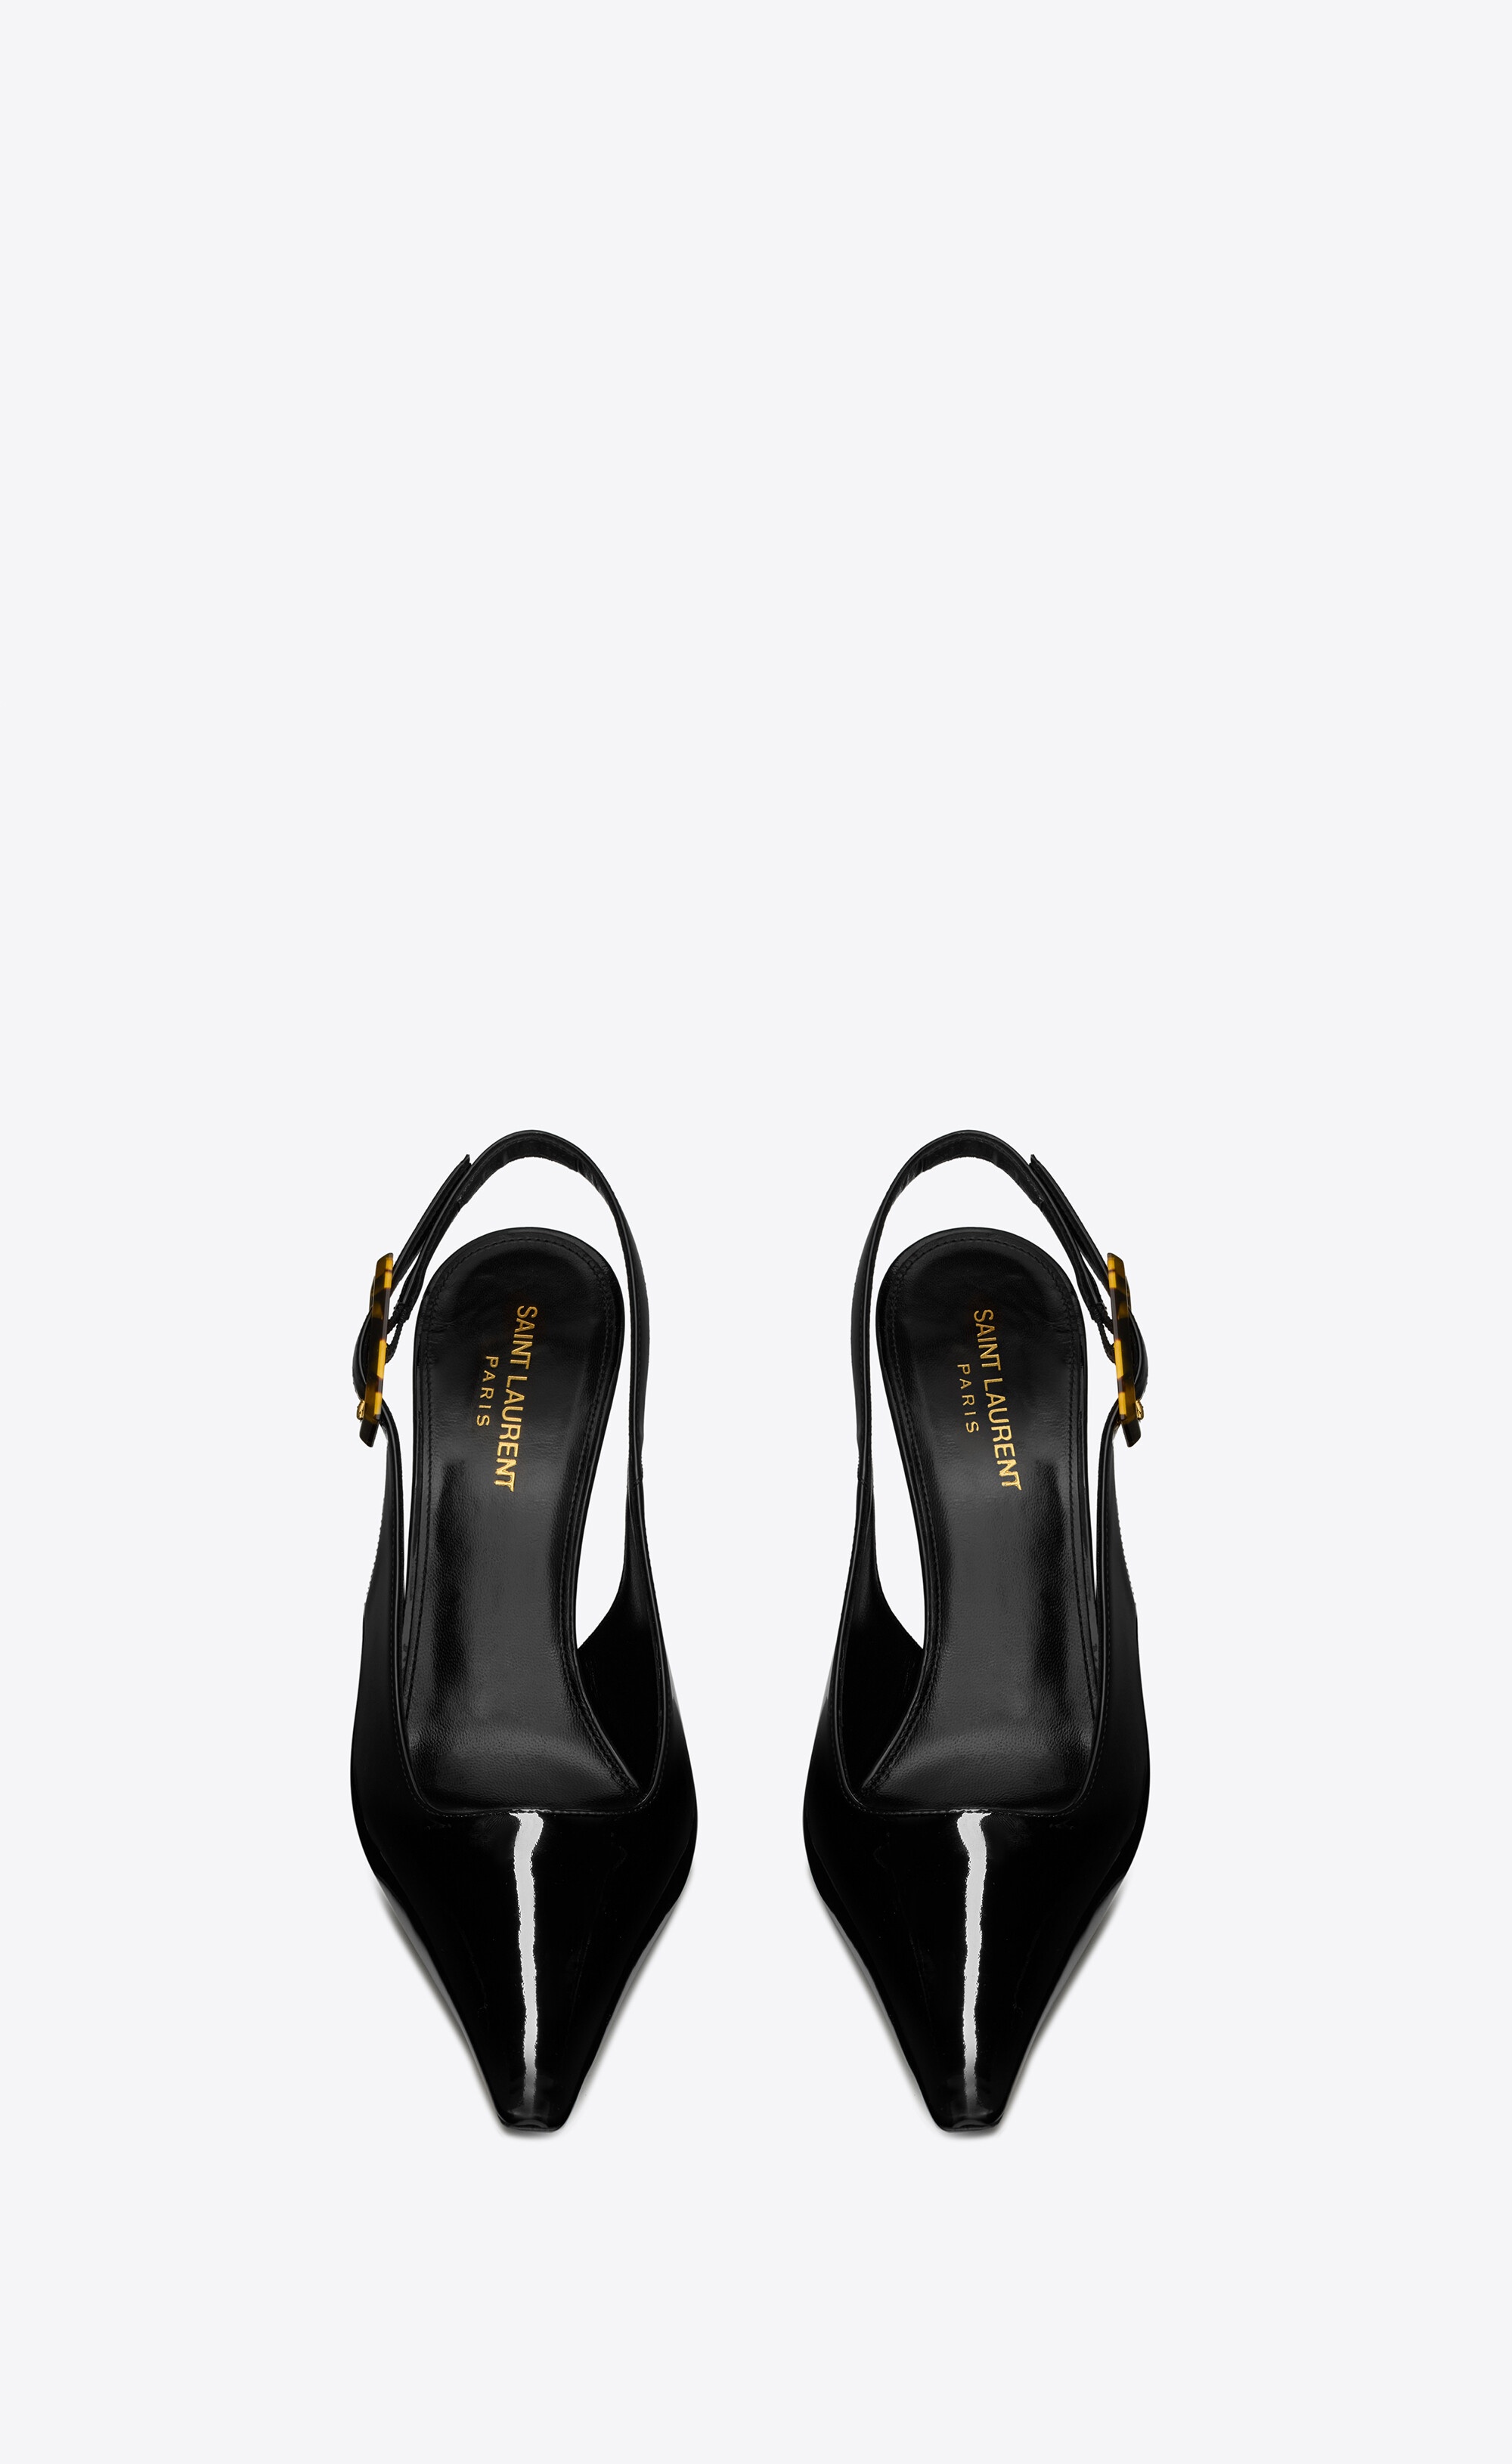 dune slingback pumps in patent leather - 2